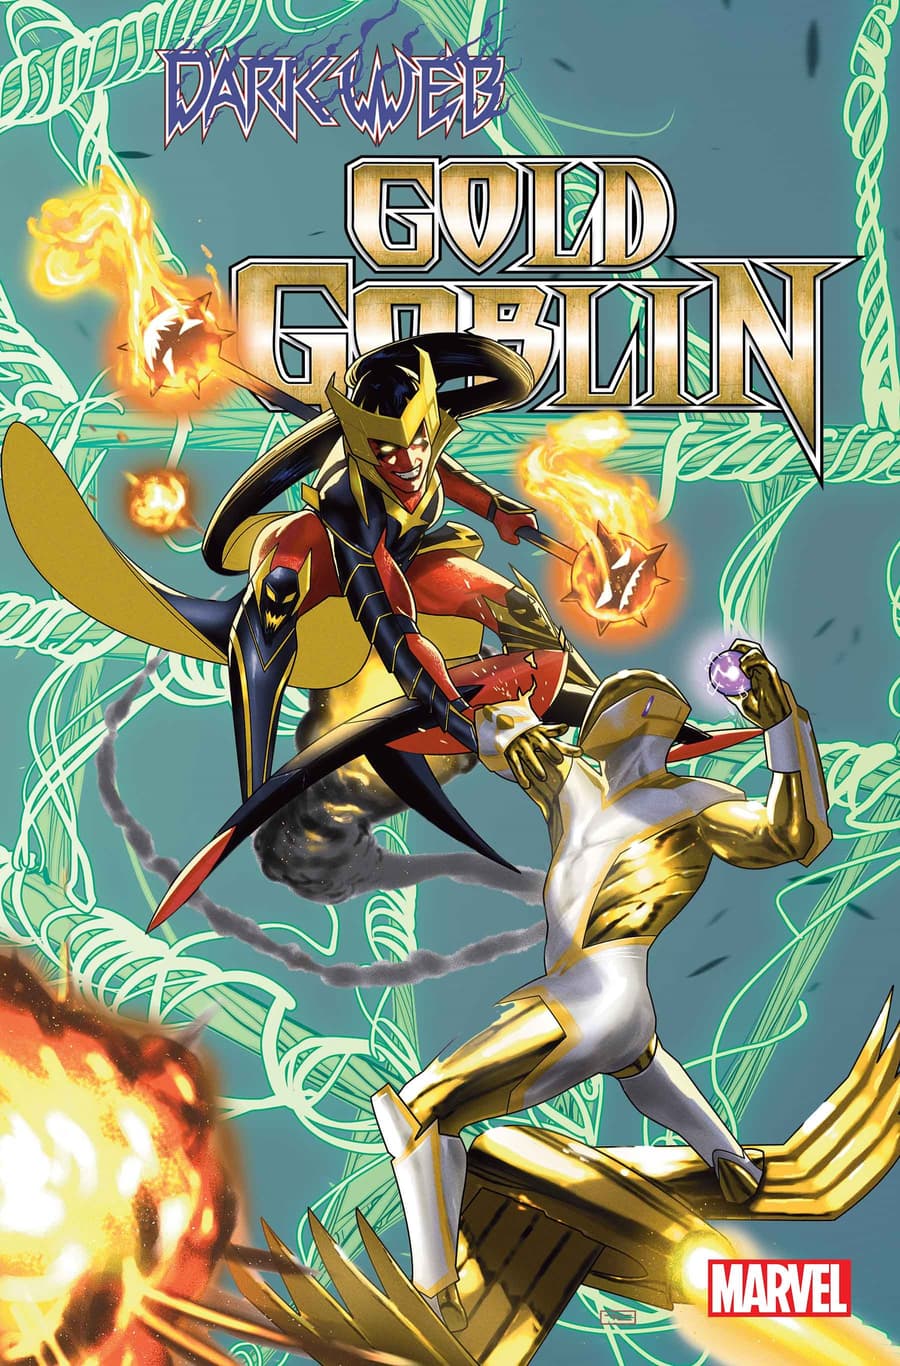 Cover to GOLD GOBLIN #3 by Taurin Clarke.